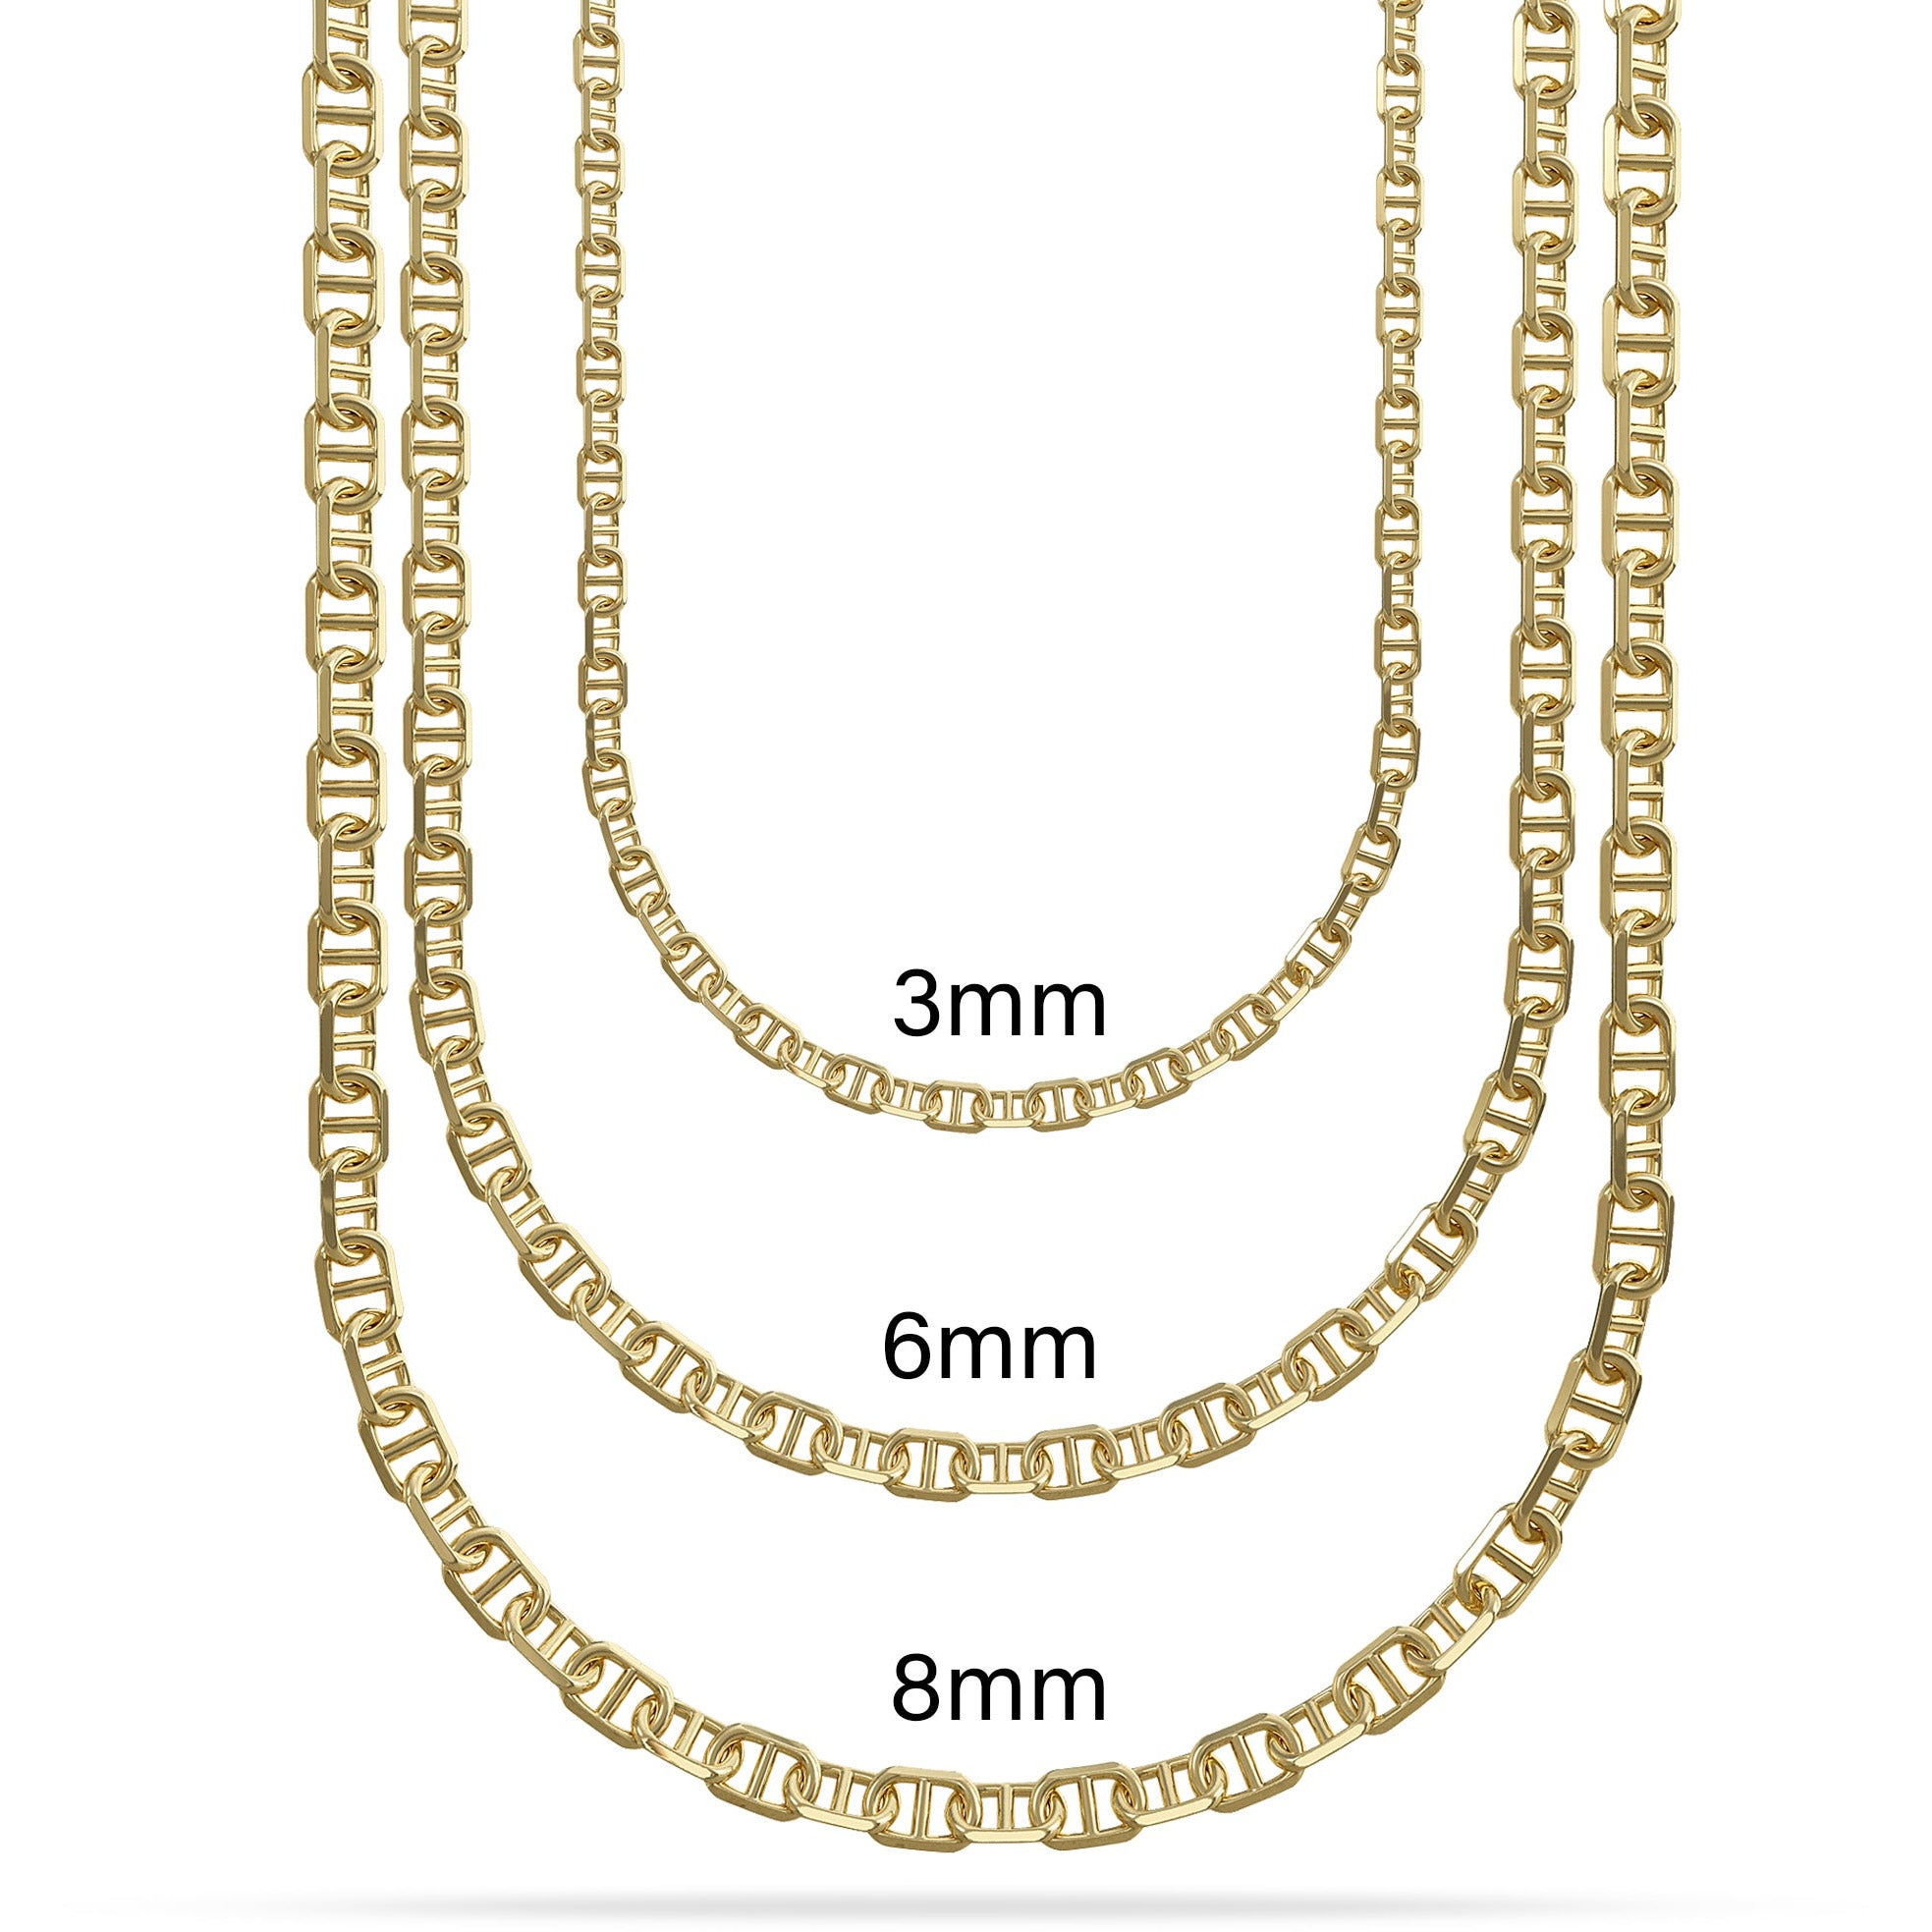 Solid 14k Gold Mariner Link Anchor Chain With Lobster Clasp Size Chart 3mm 6mm 8mm Offered By Nautical Treasure In The Florida Keys For Unique Custom Fish Pendant Jewelry